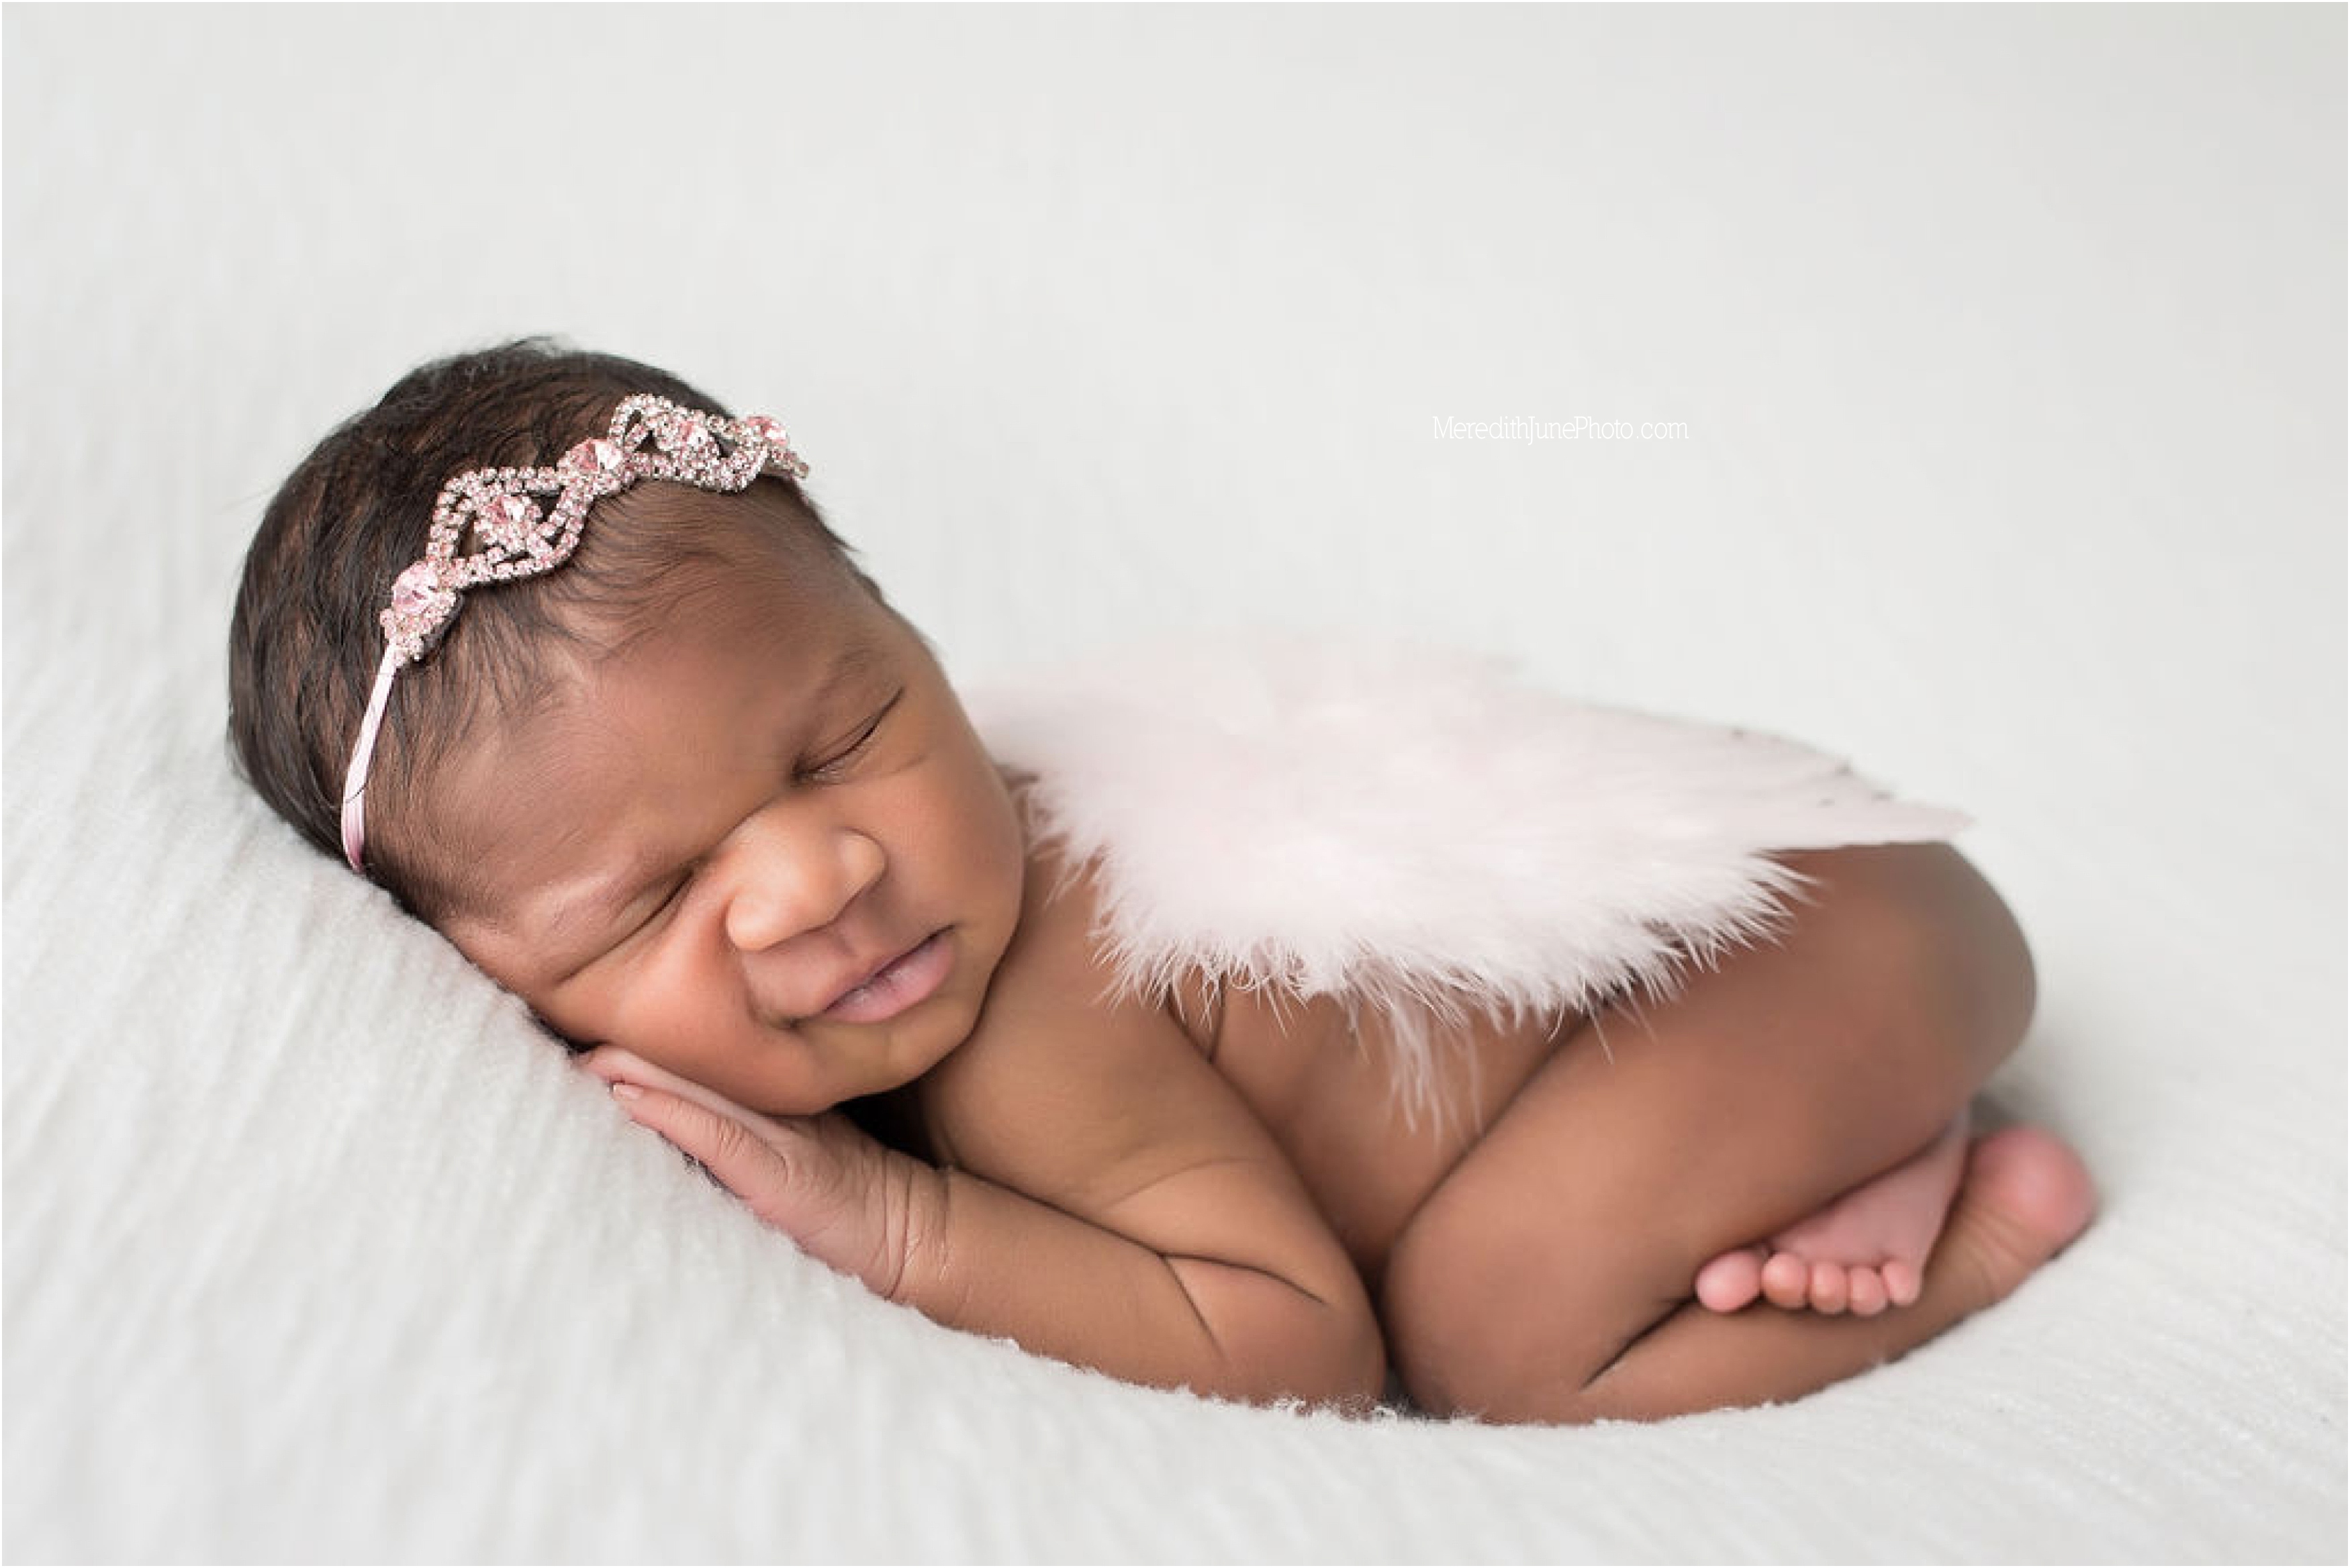 Newborn session at Meredith June Photography